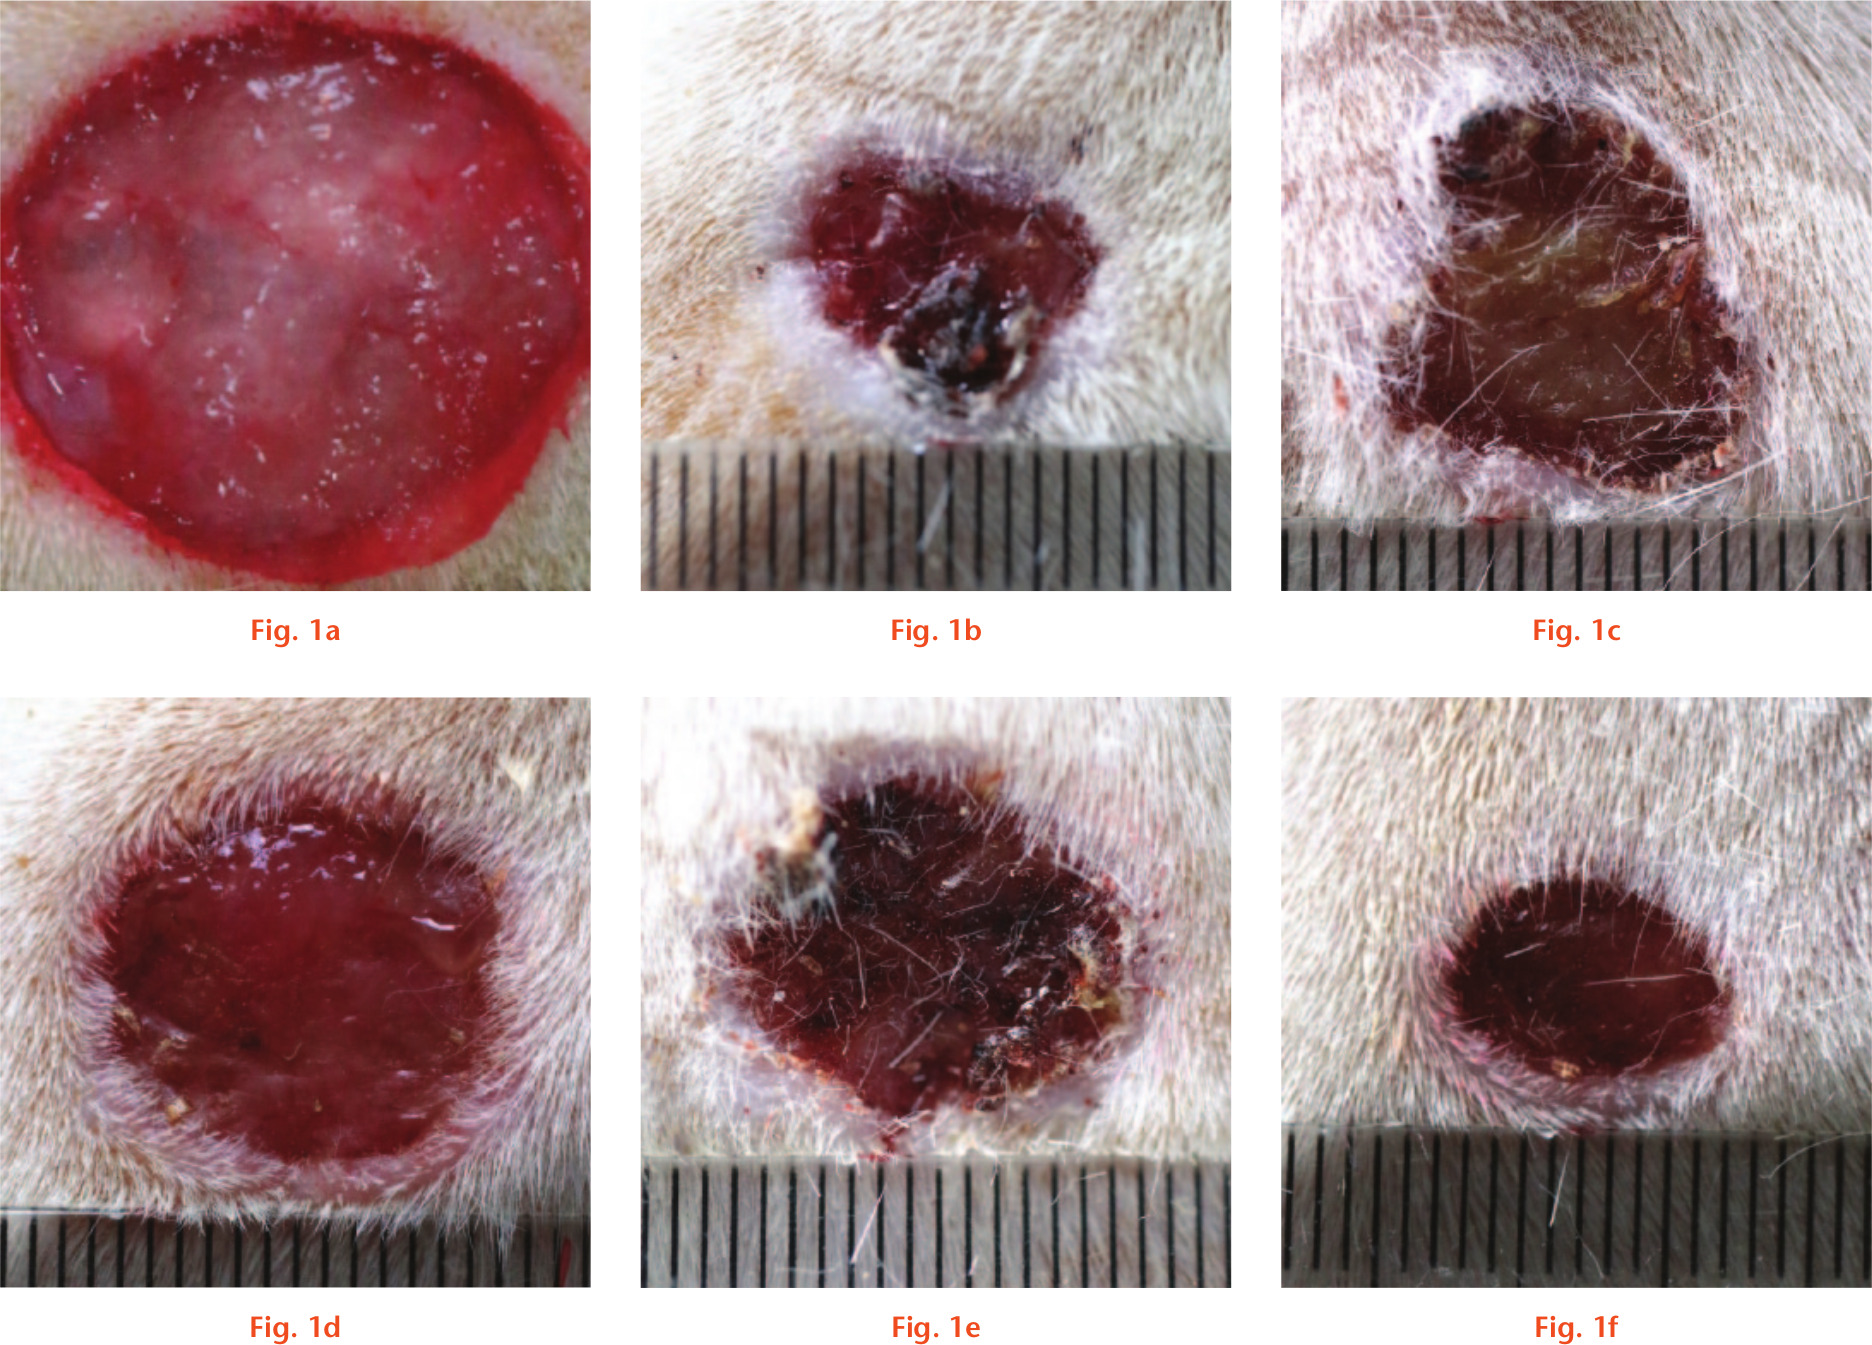 Fig. 1 
            Images of wounds before and after two weeks. a) The original wound was created in an 18 mm size. The wounds were then irrigated daily for two weeks with: b) normal saline; c) castile soap; d) benzalkonium chloride; e) bacitracin; and f) ethylenediaminetetraacetic acid (EDTA).
          